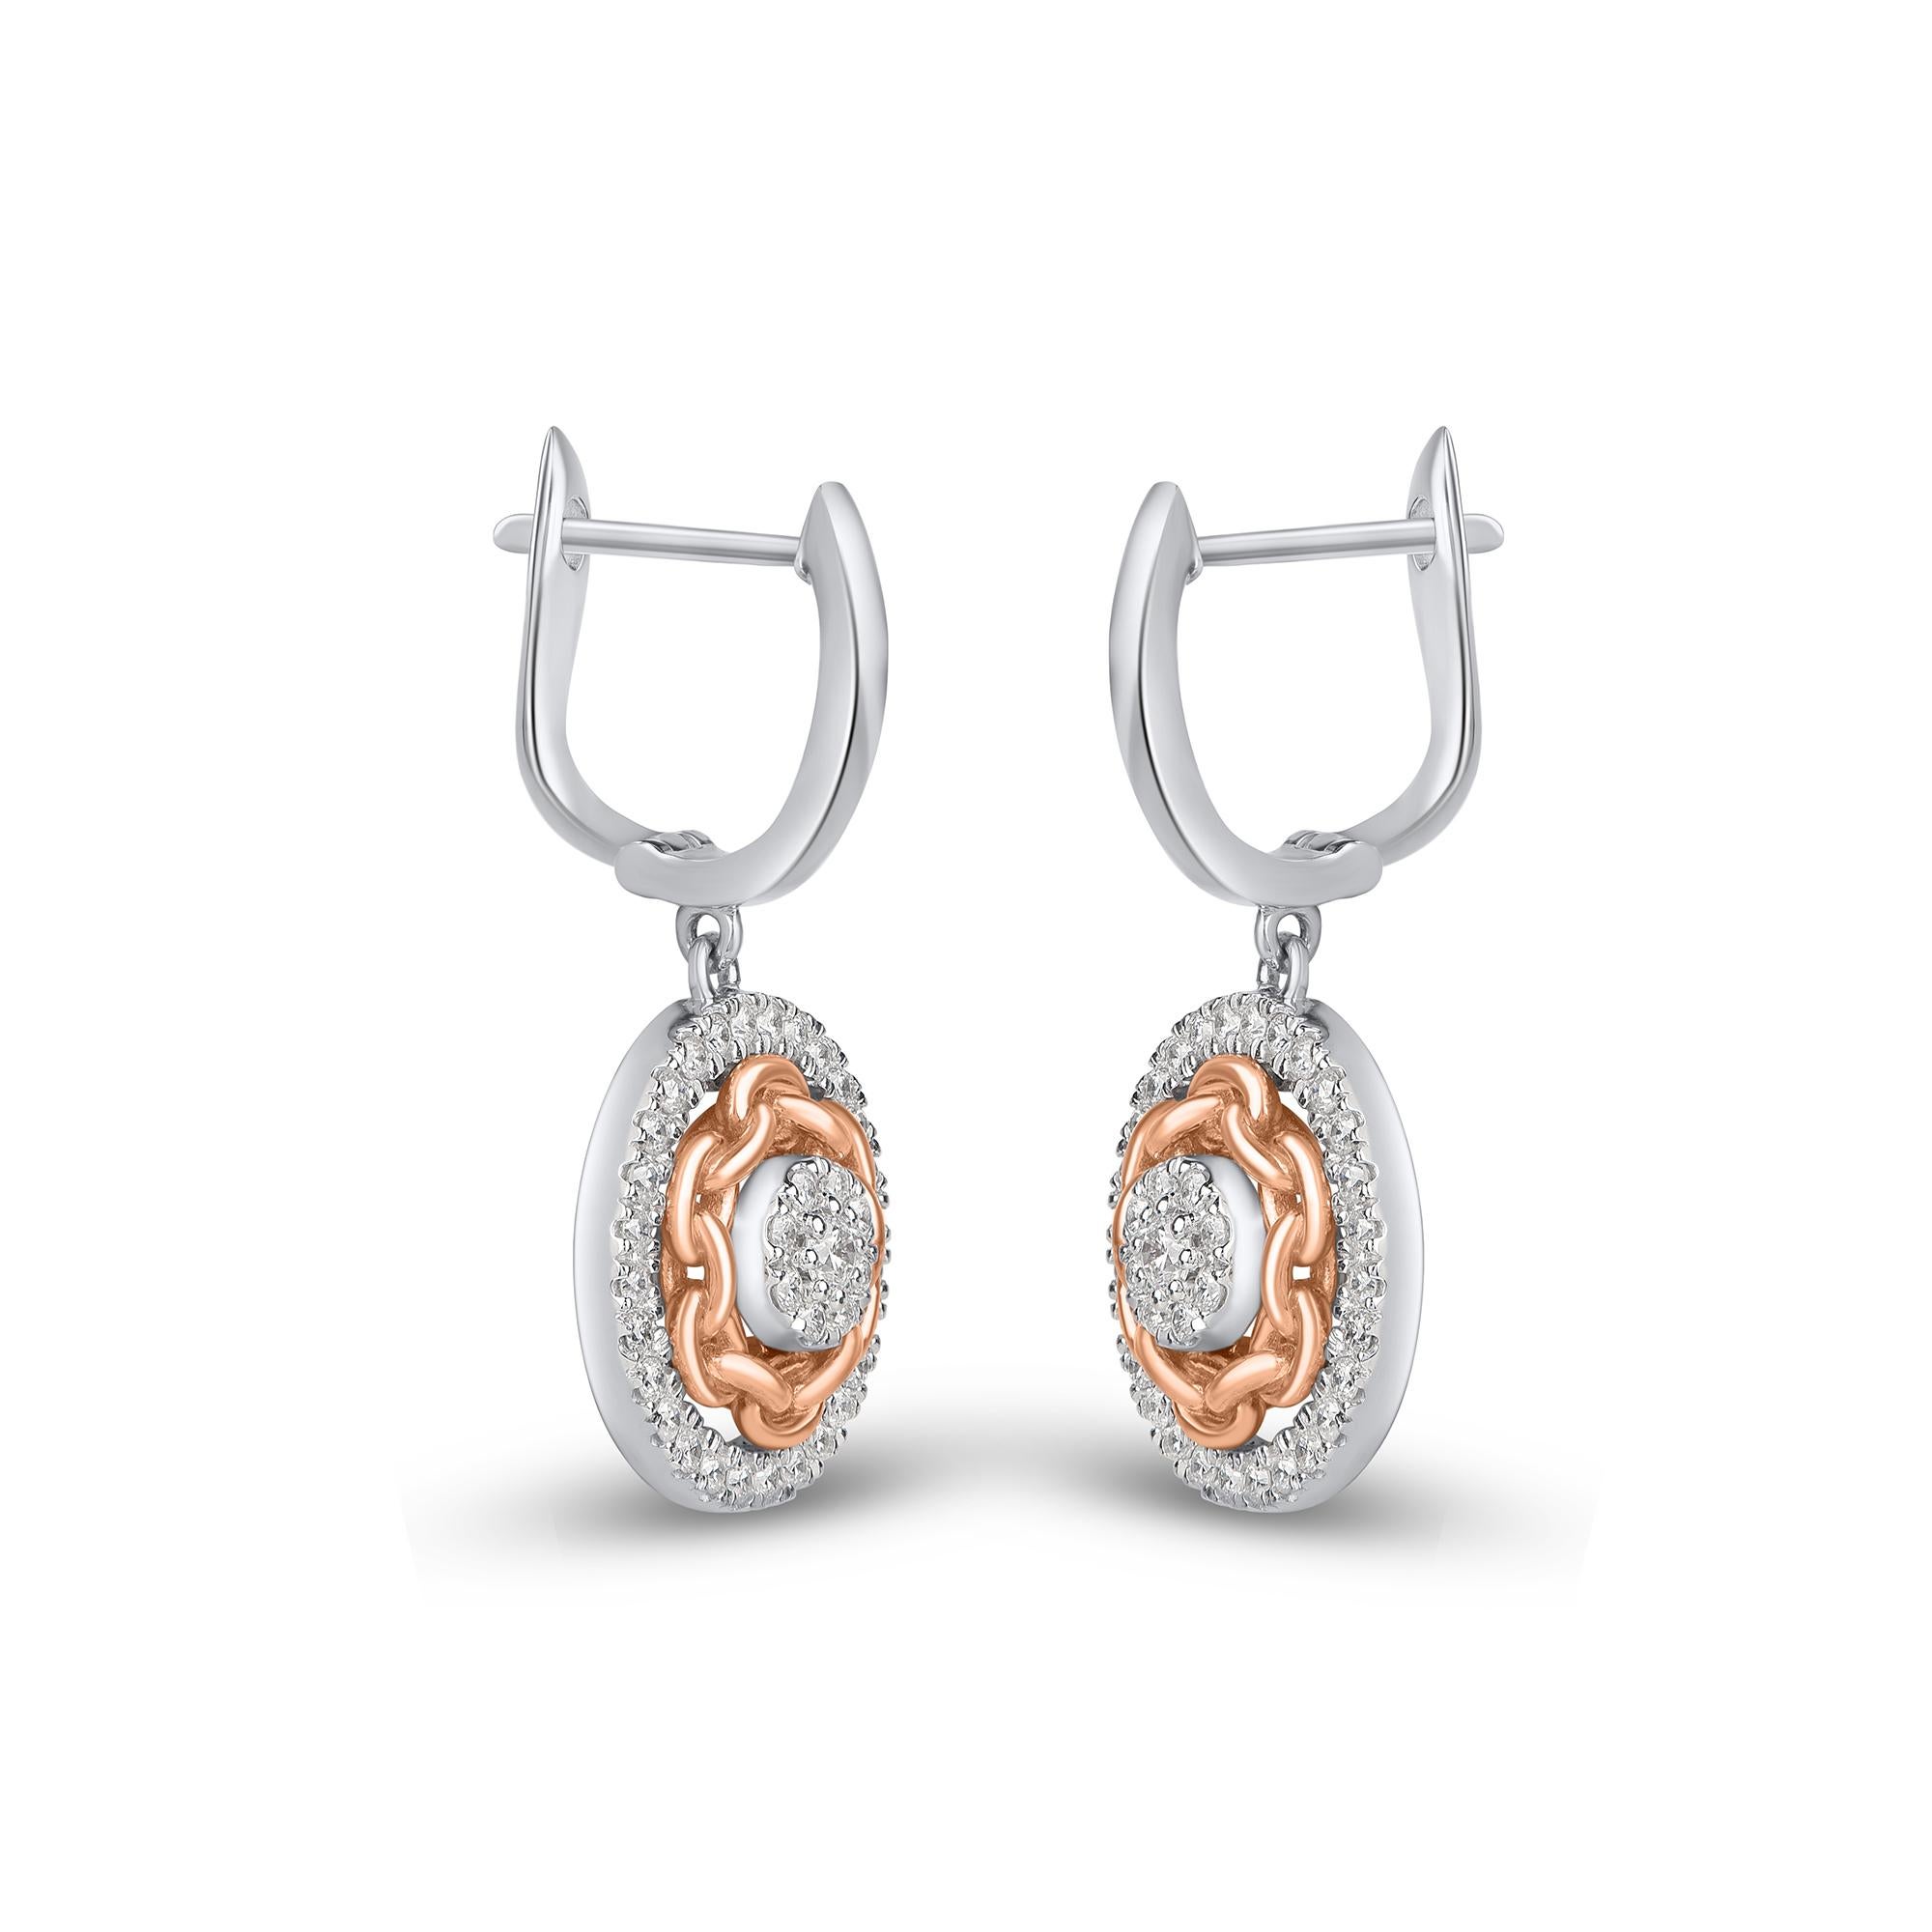 Perfect for everyday wear - these circular drop diamond huggie earrings are studded with 74  diamonds in prong and micro-prong setting and crafted in 18 karat two-toned gold. Diamonds are graded HI color, I1 clarity.  

Meal color can be customized